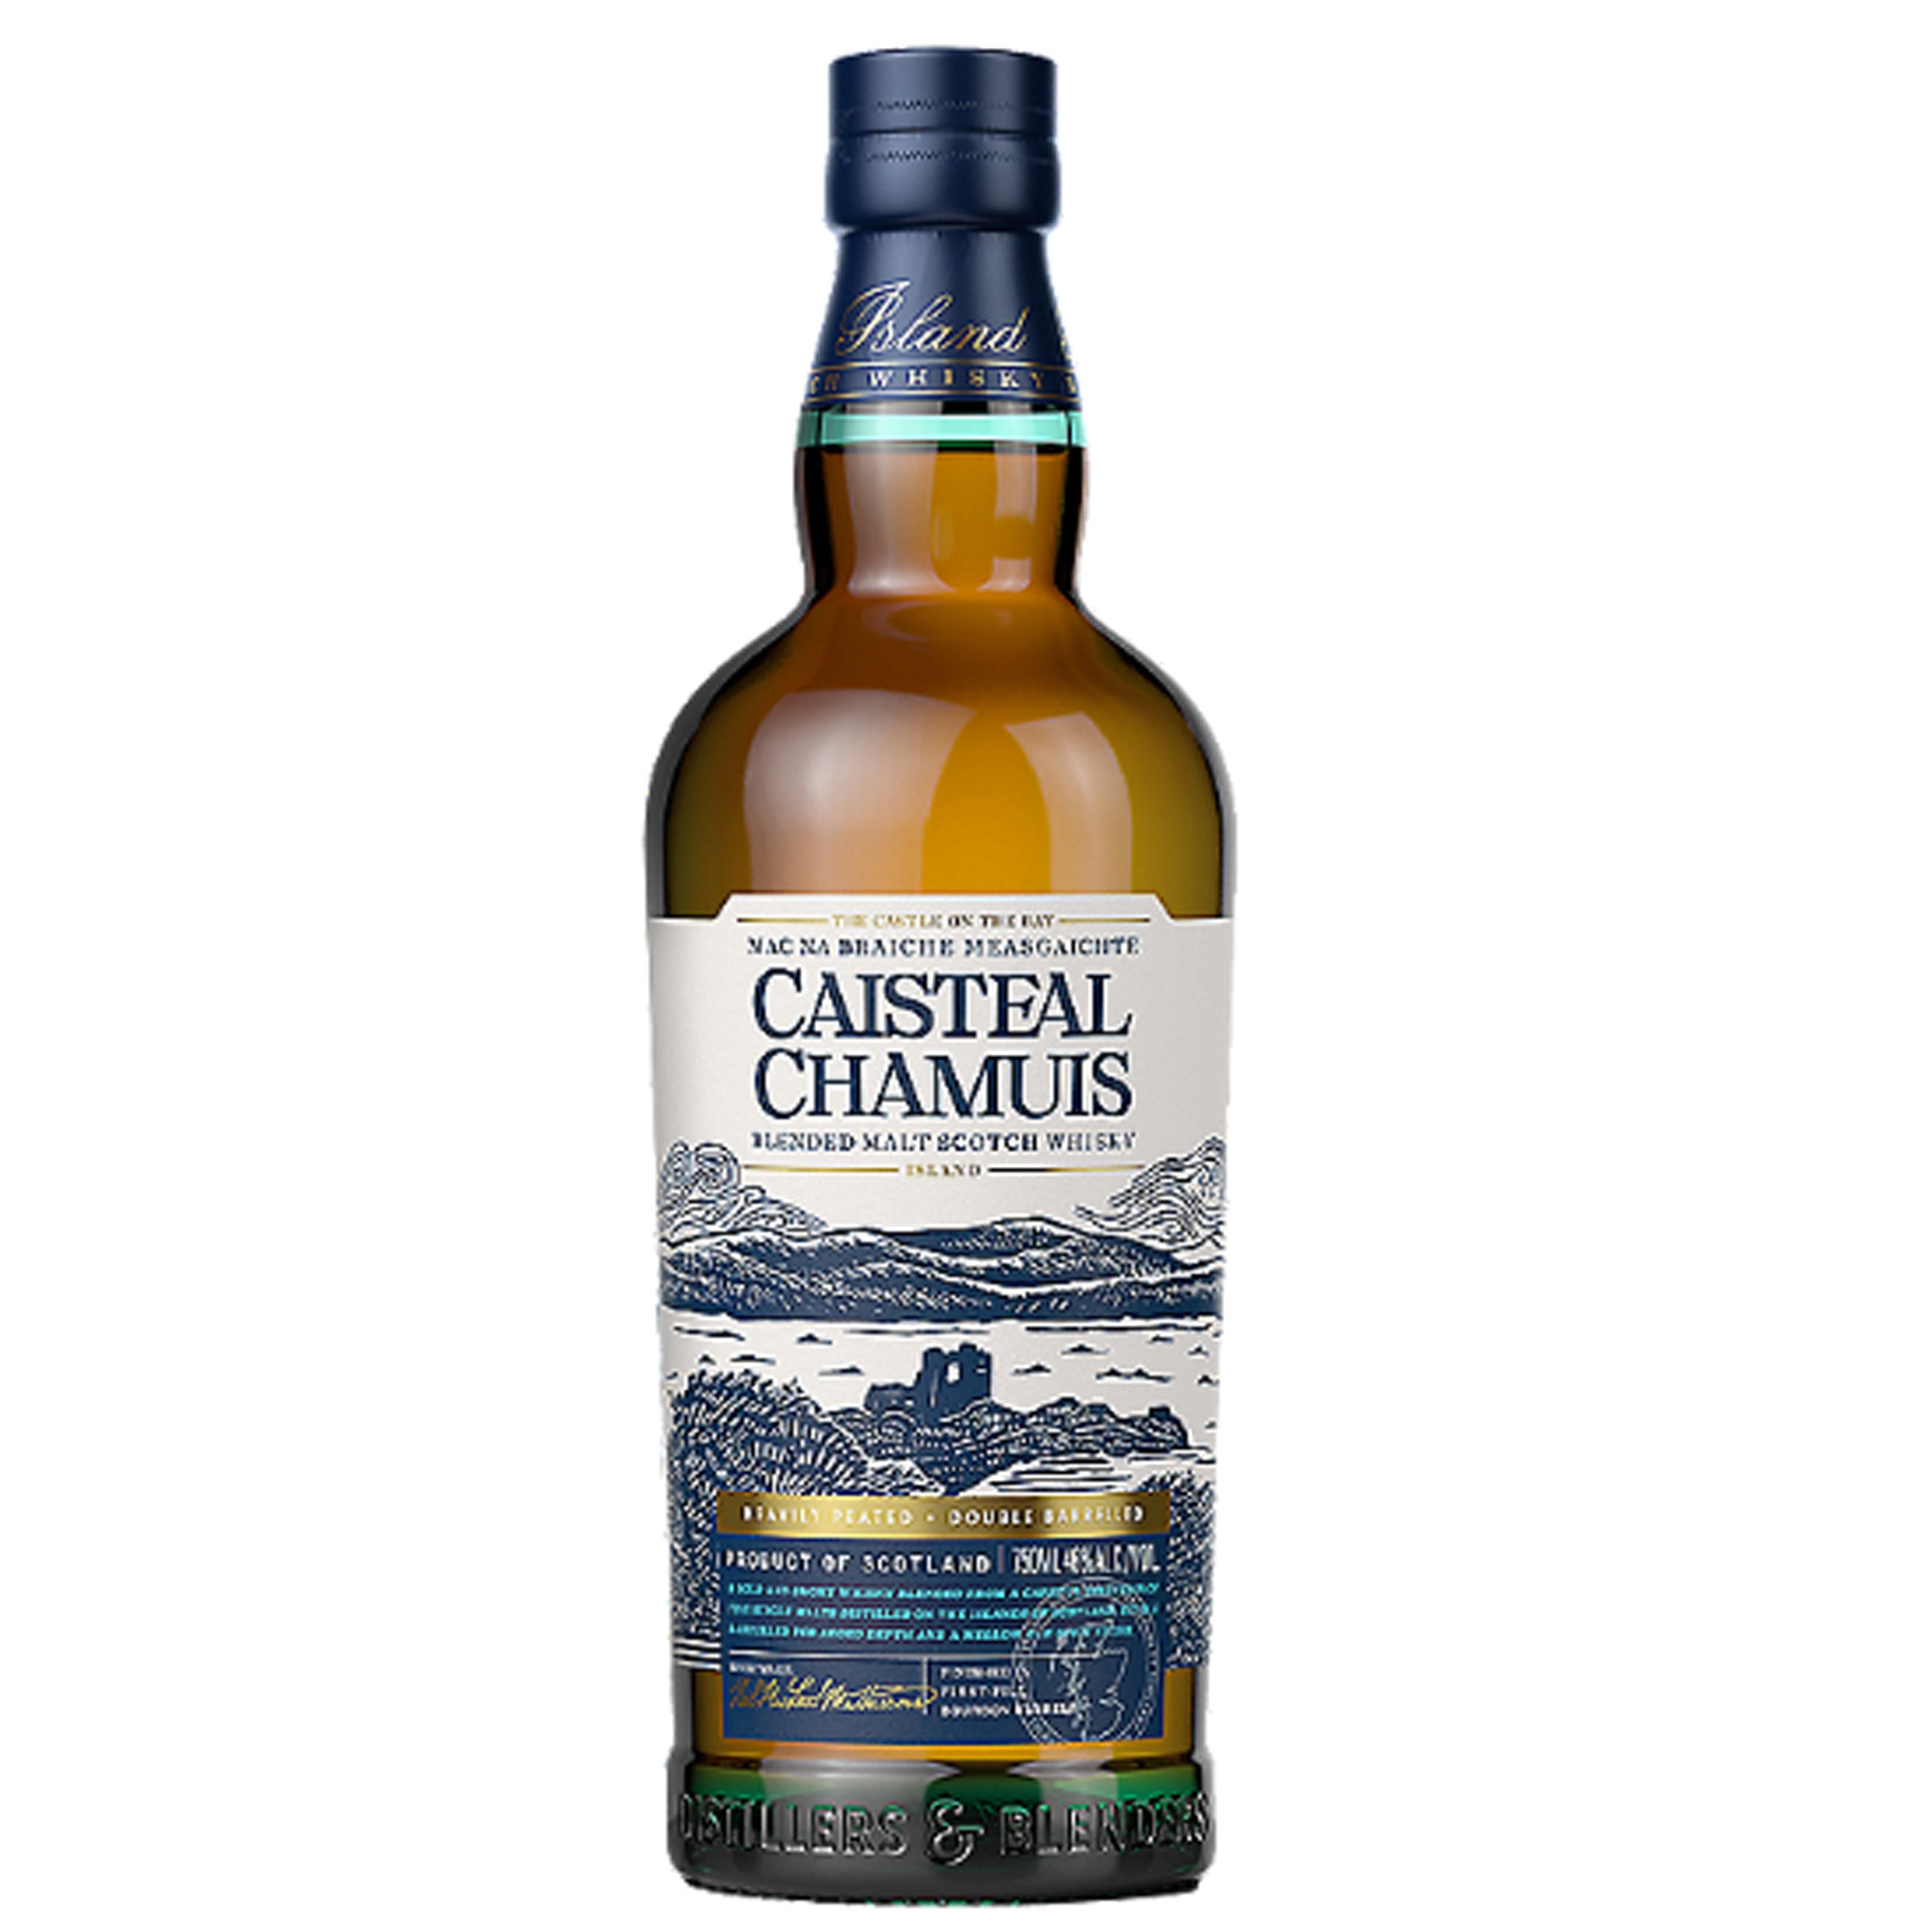 Caisteal Chamuis Blended Malt Scotch Whisky Finished In First Fill Bourbon Barrels